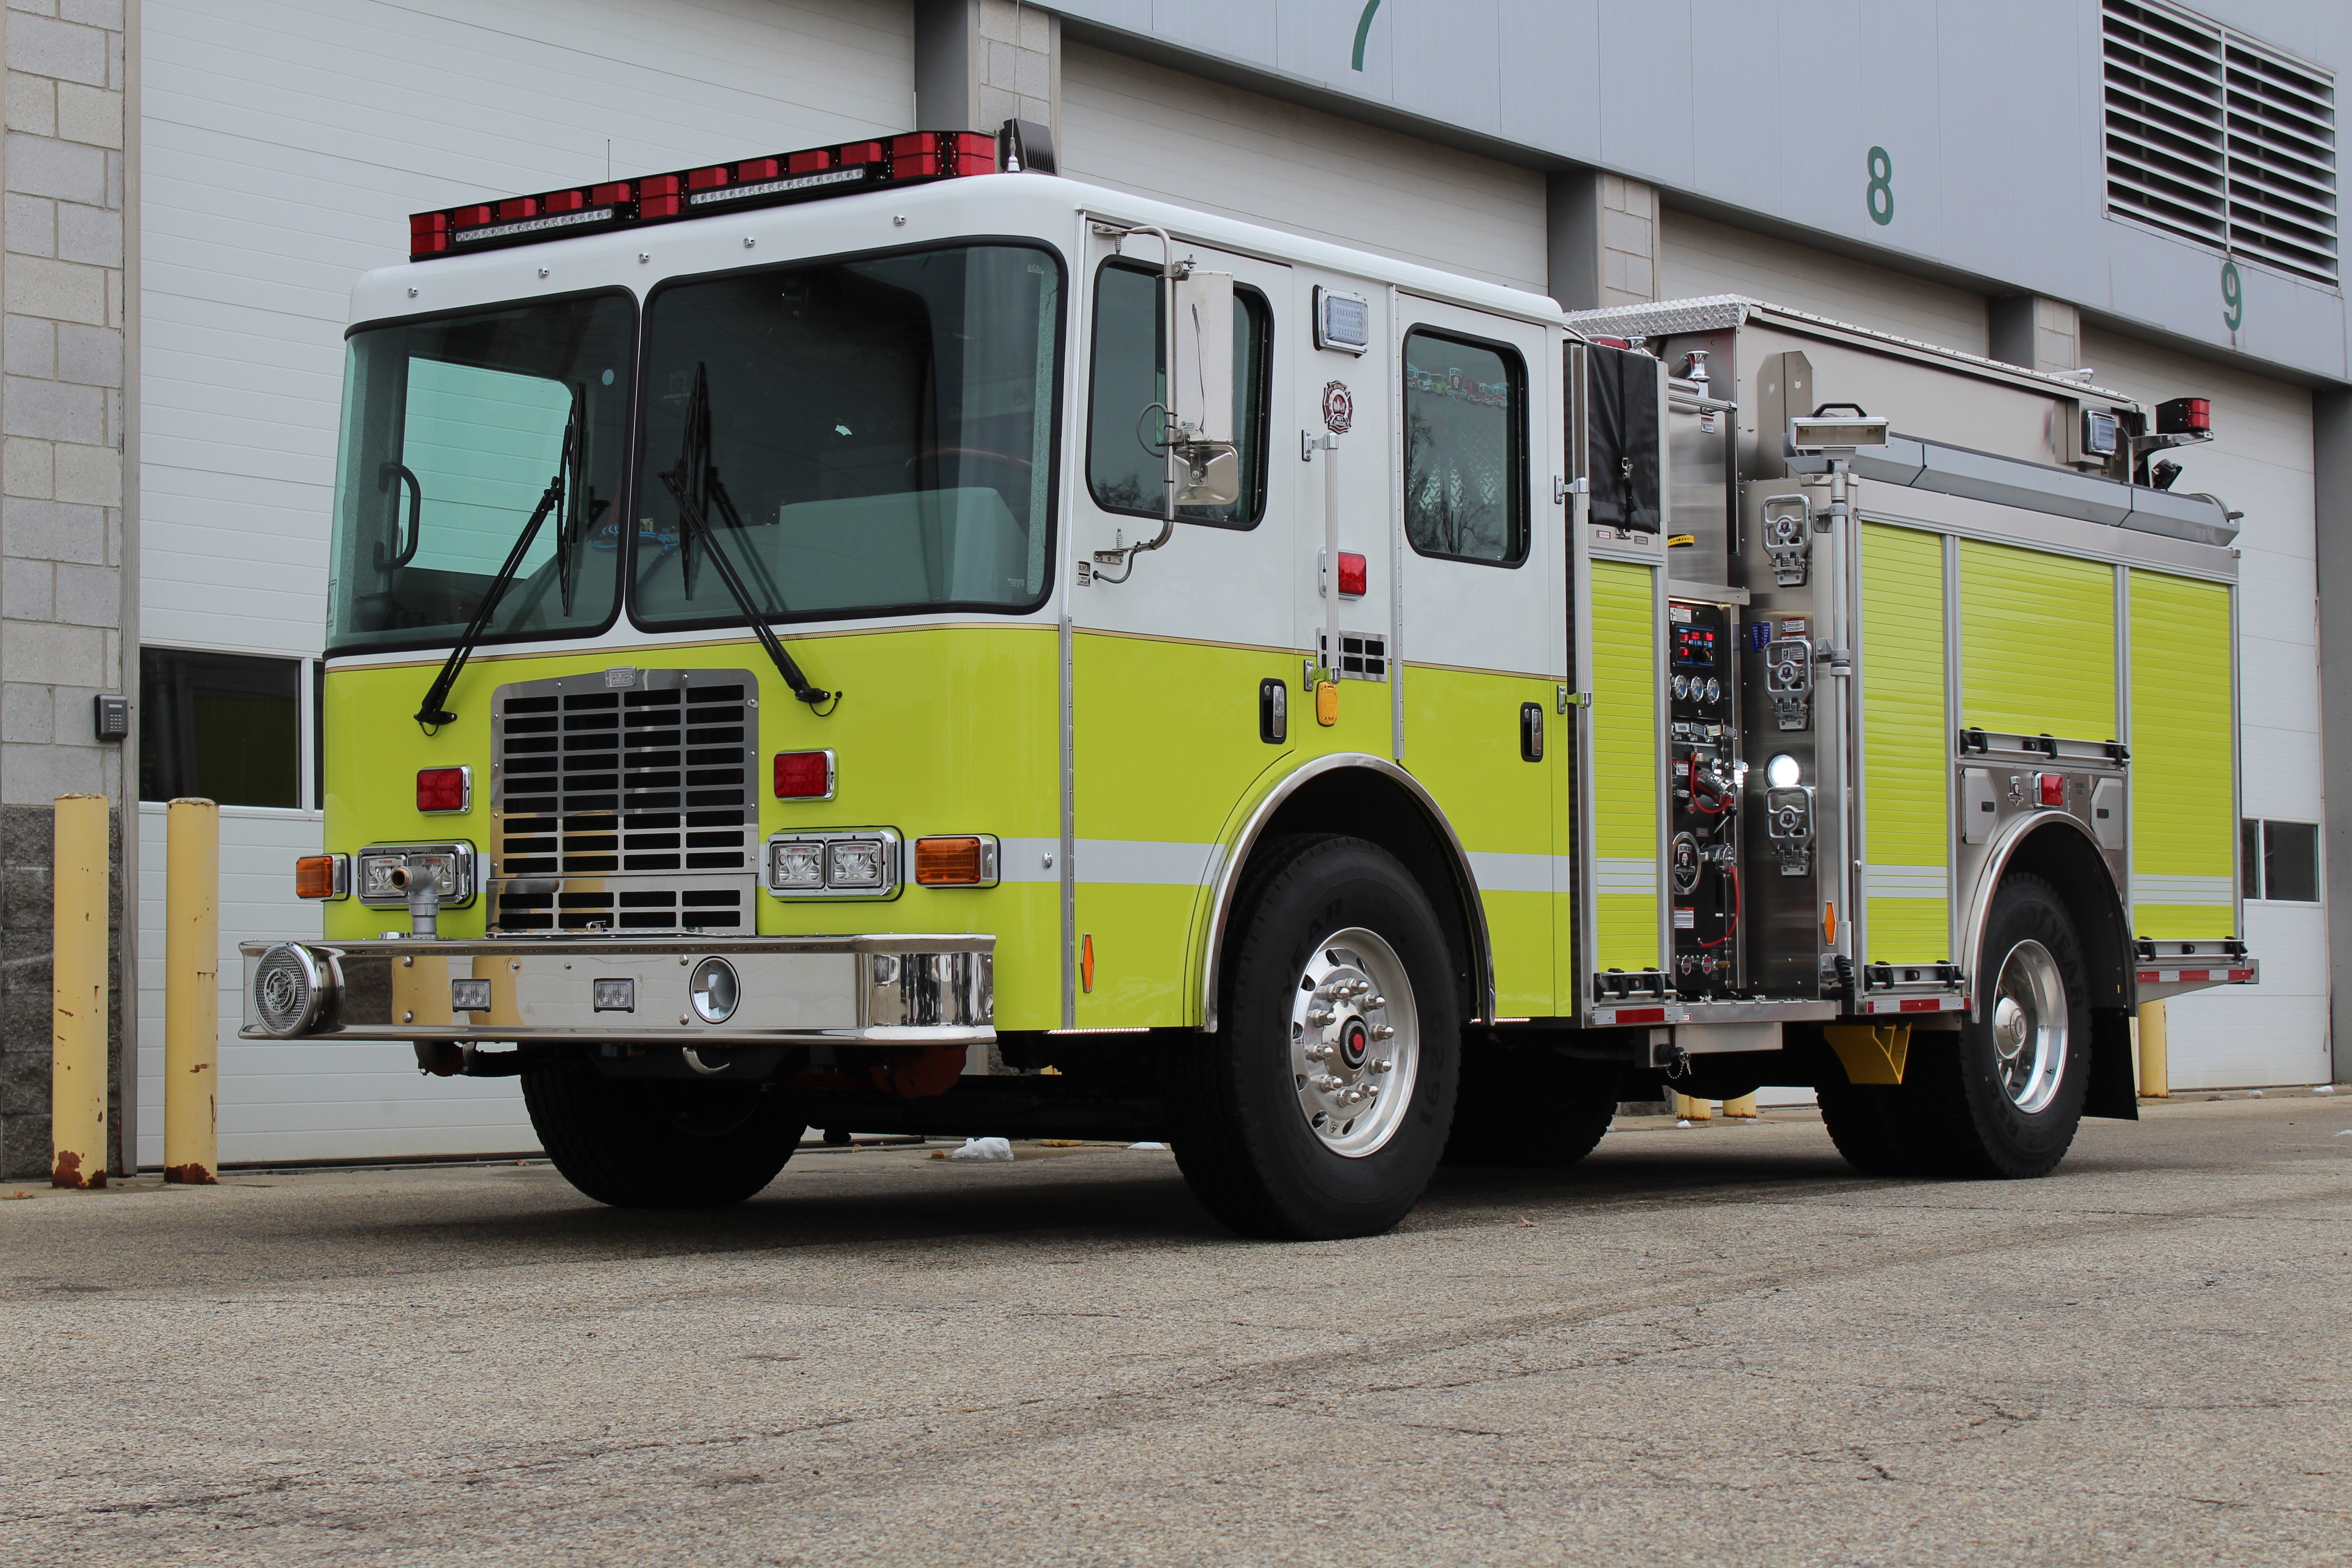 Willows Fire Department, CA – #23282